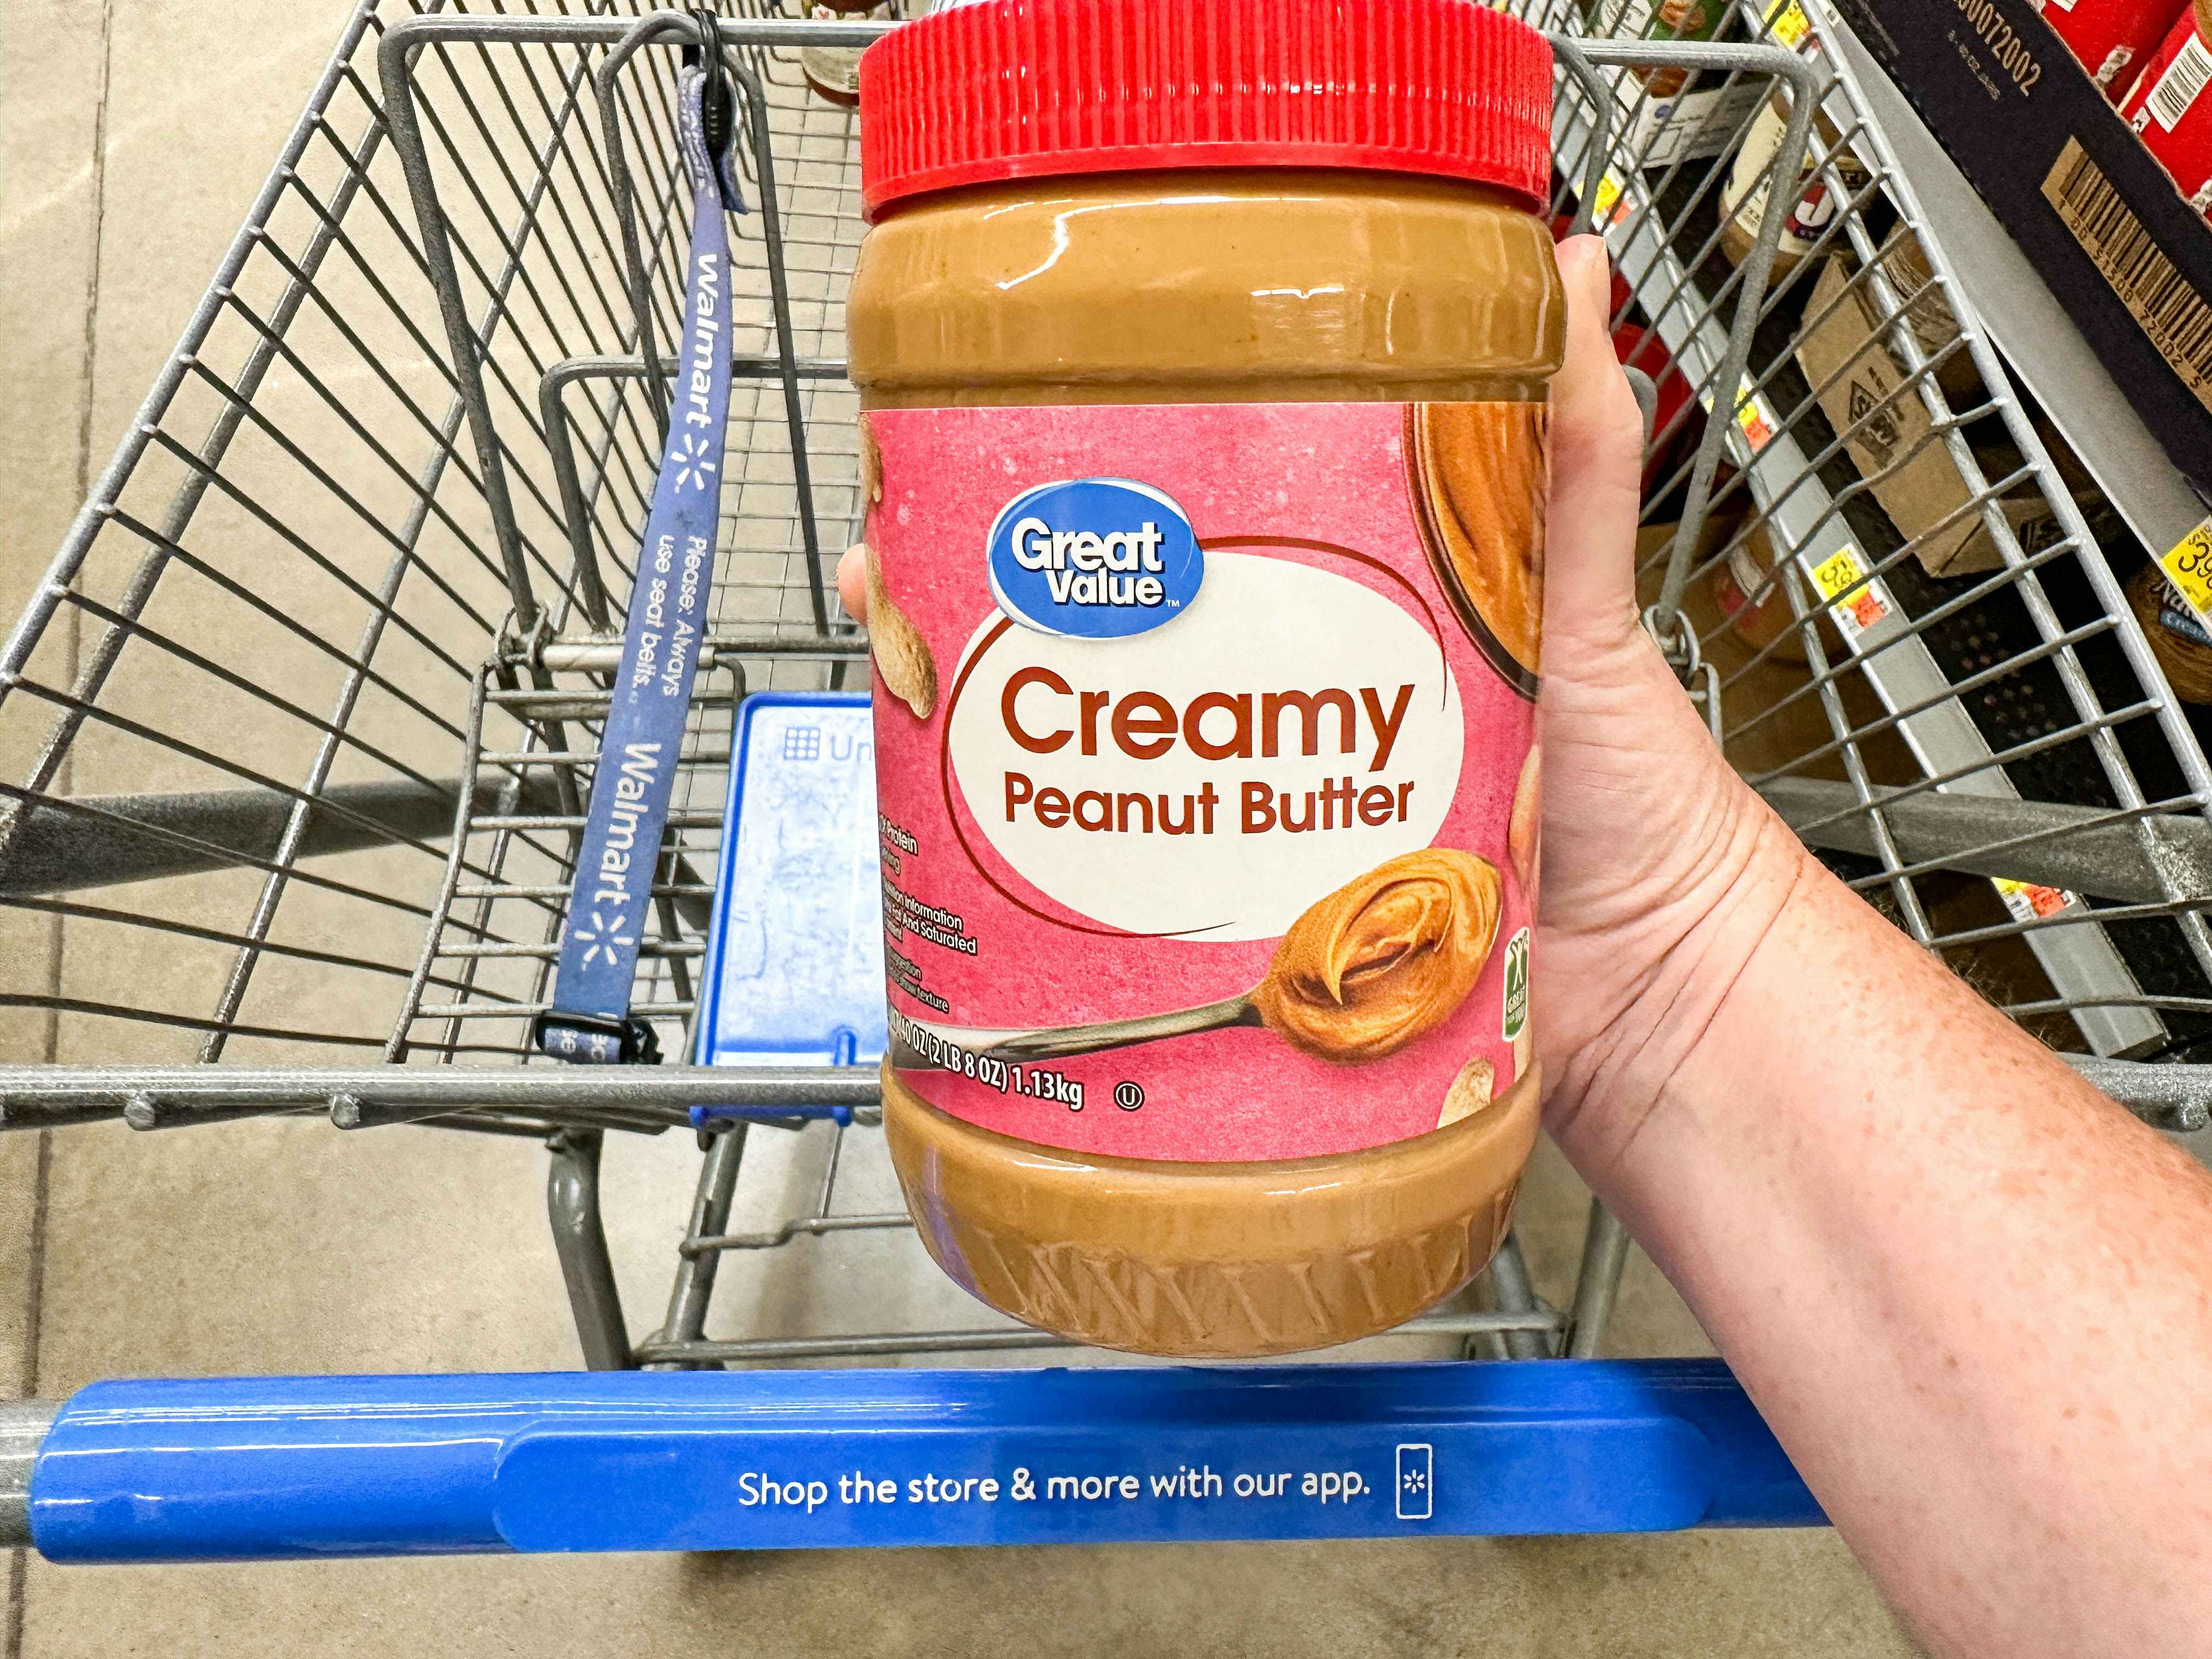 a jar of peanut butter being held in store 